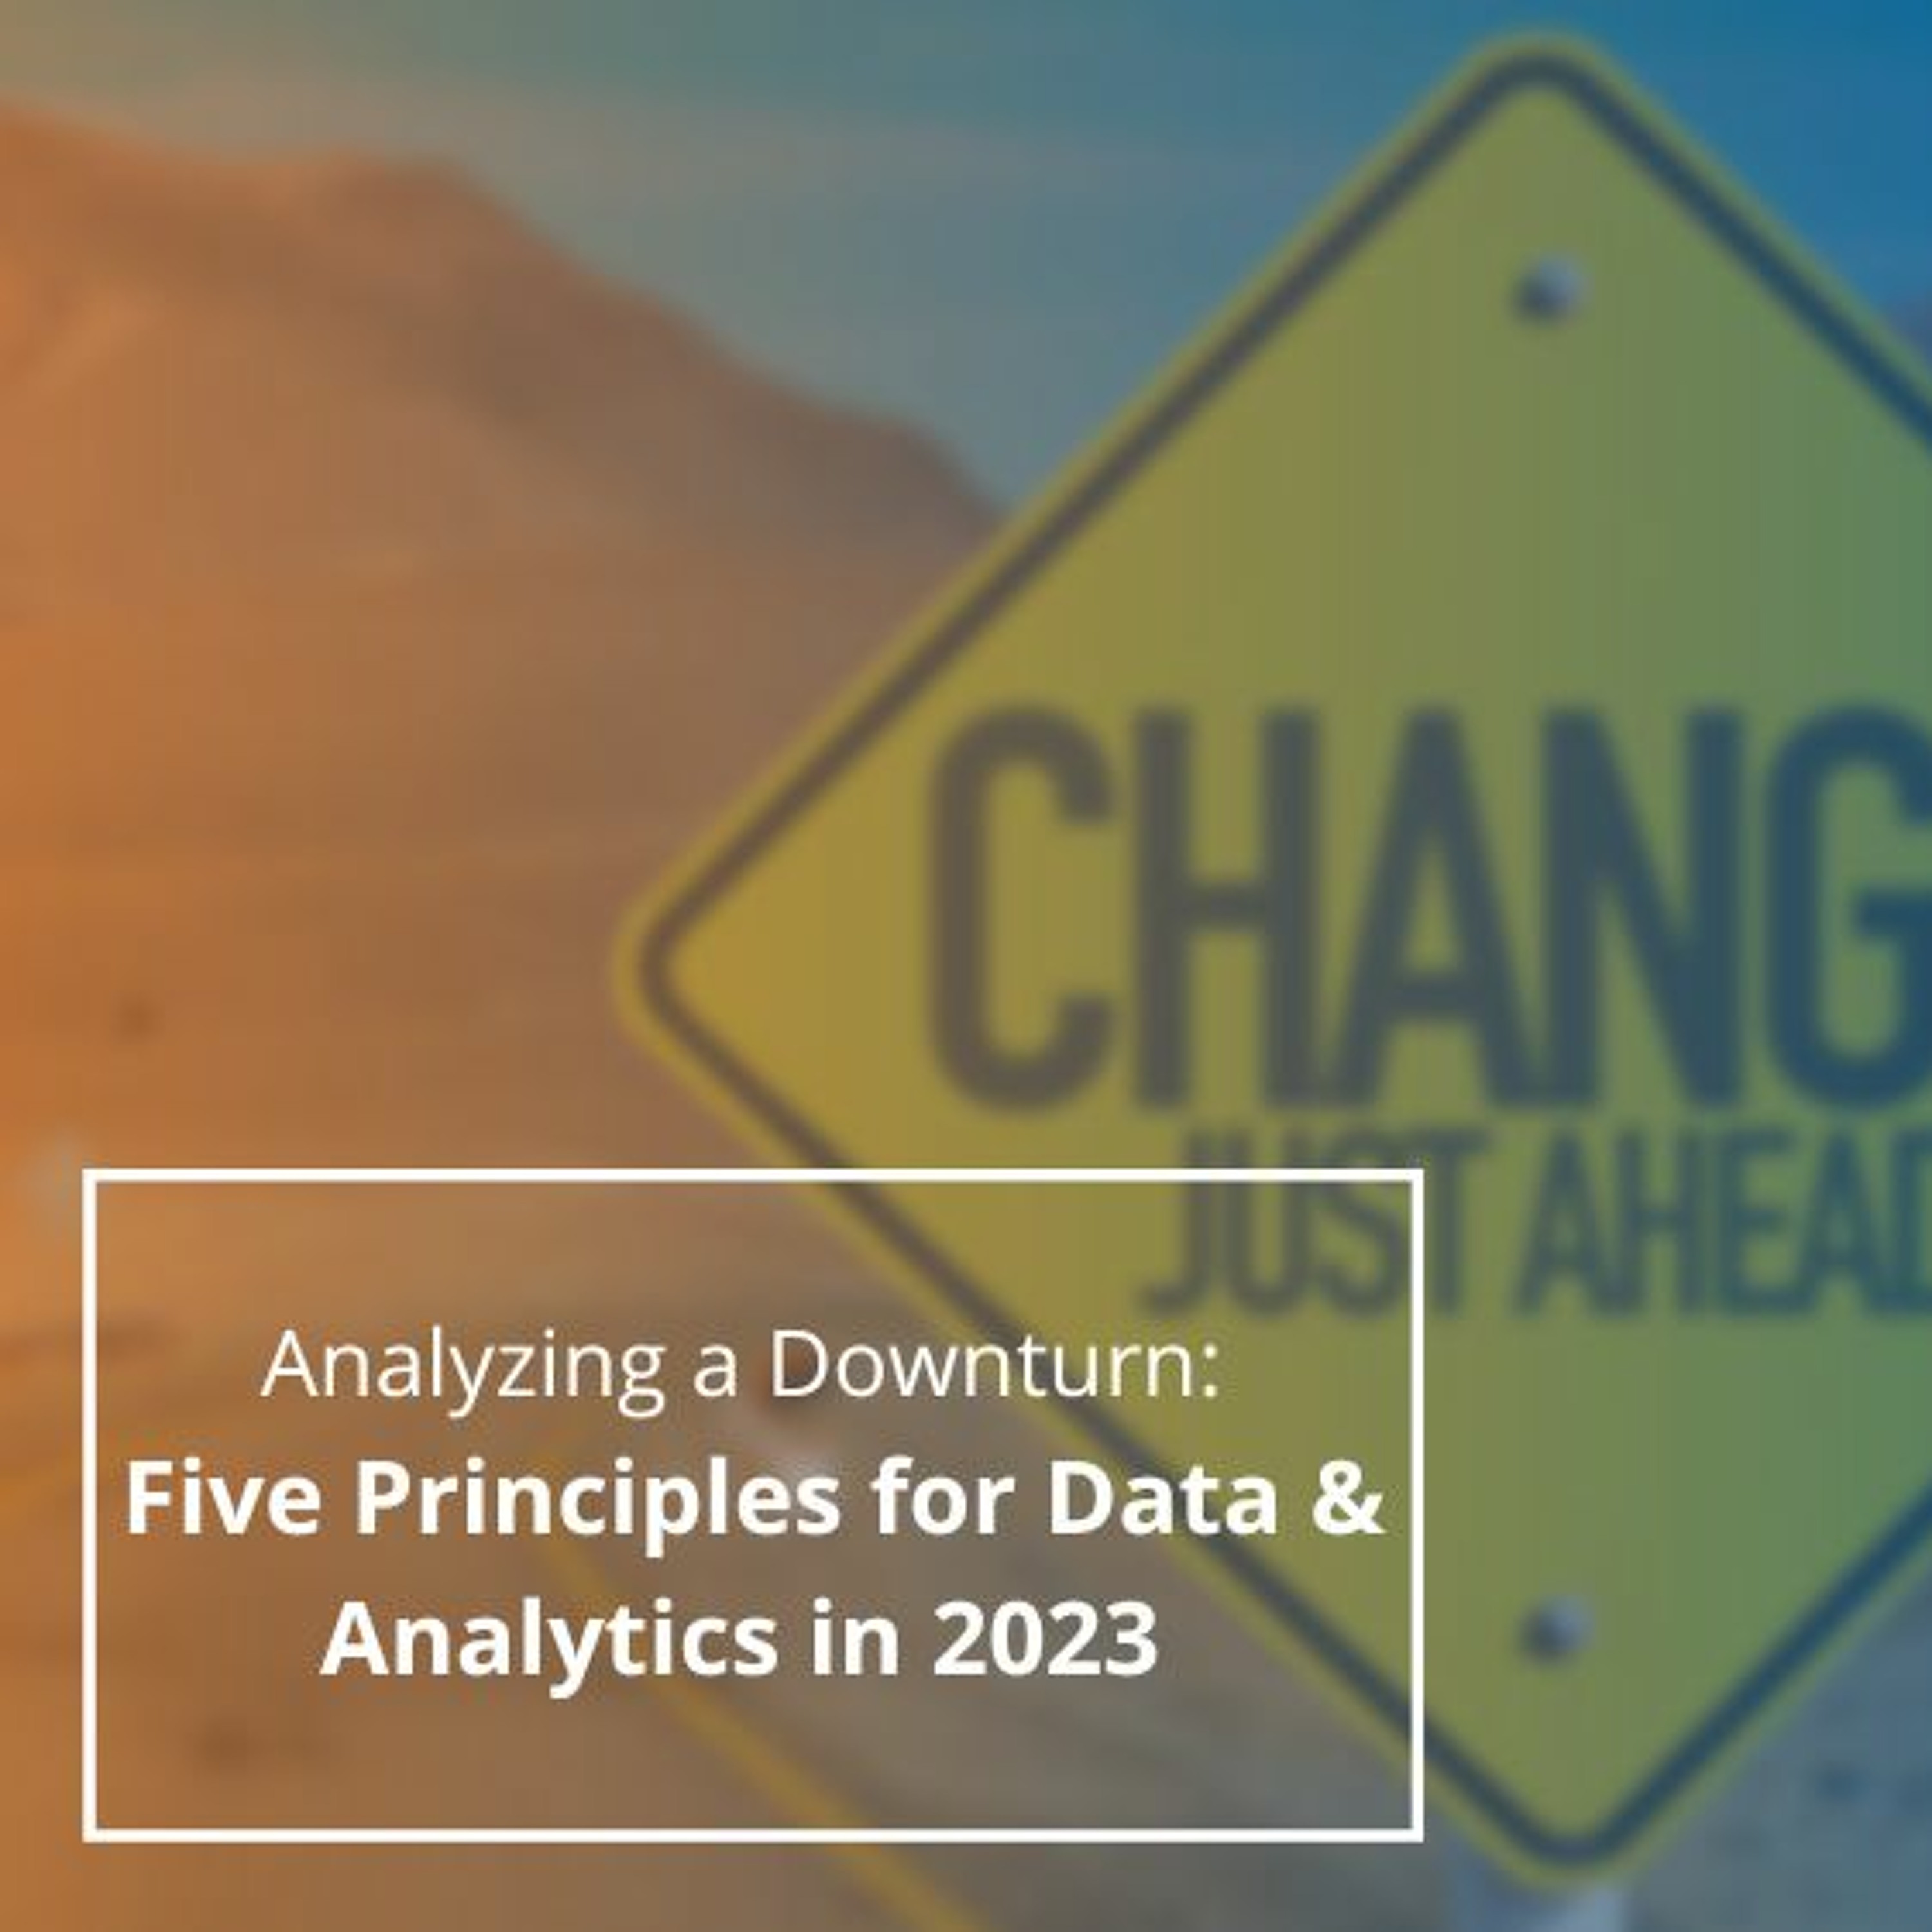 Analyzing a Downturn: Five Principles for Data & Analytics in 2023 - Audio Blog